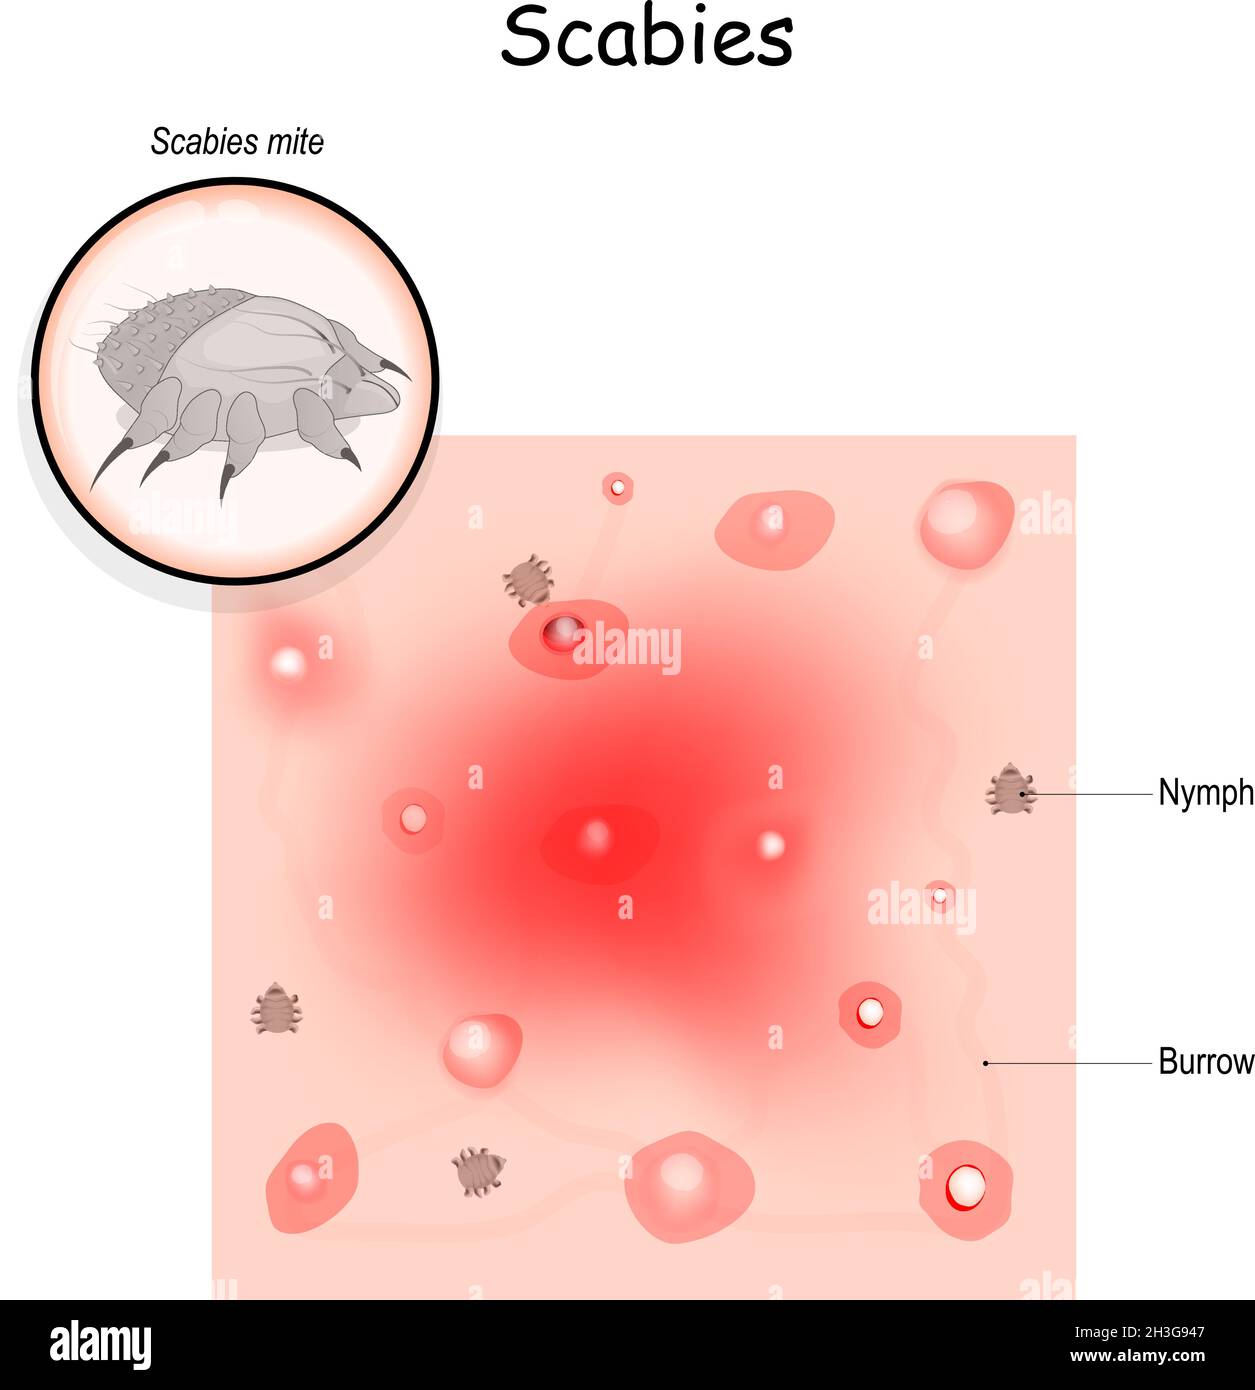 Scabies. contagious skin infestation. Close-up of scabies mite and Human's skin with Magnified view of a burrowing trail of the mite. Stock Vector